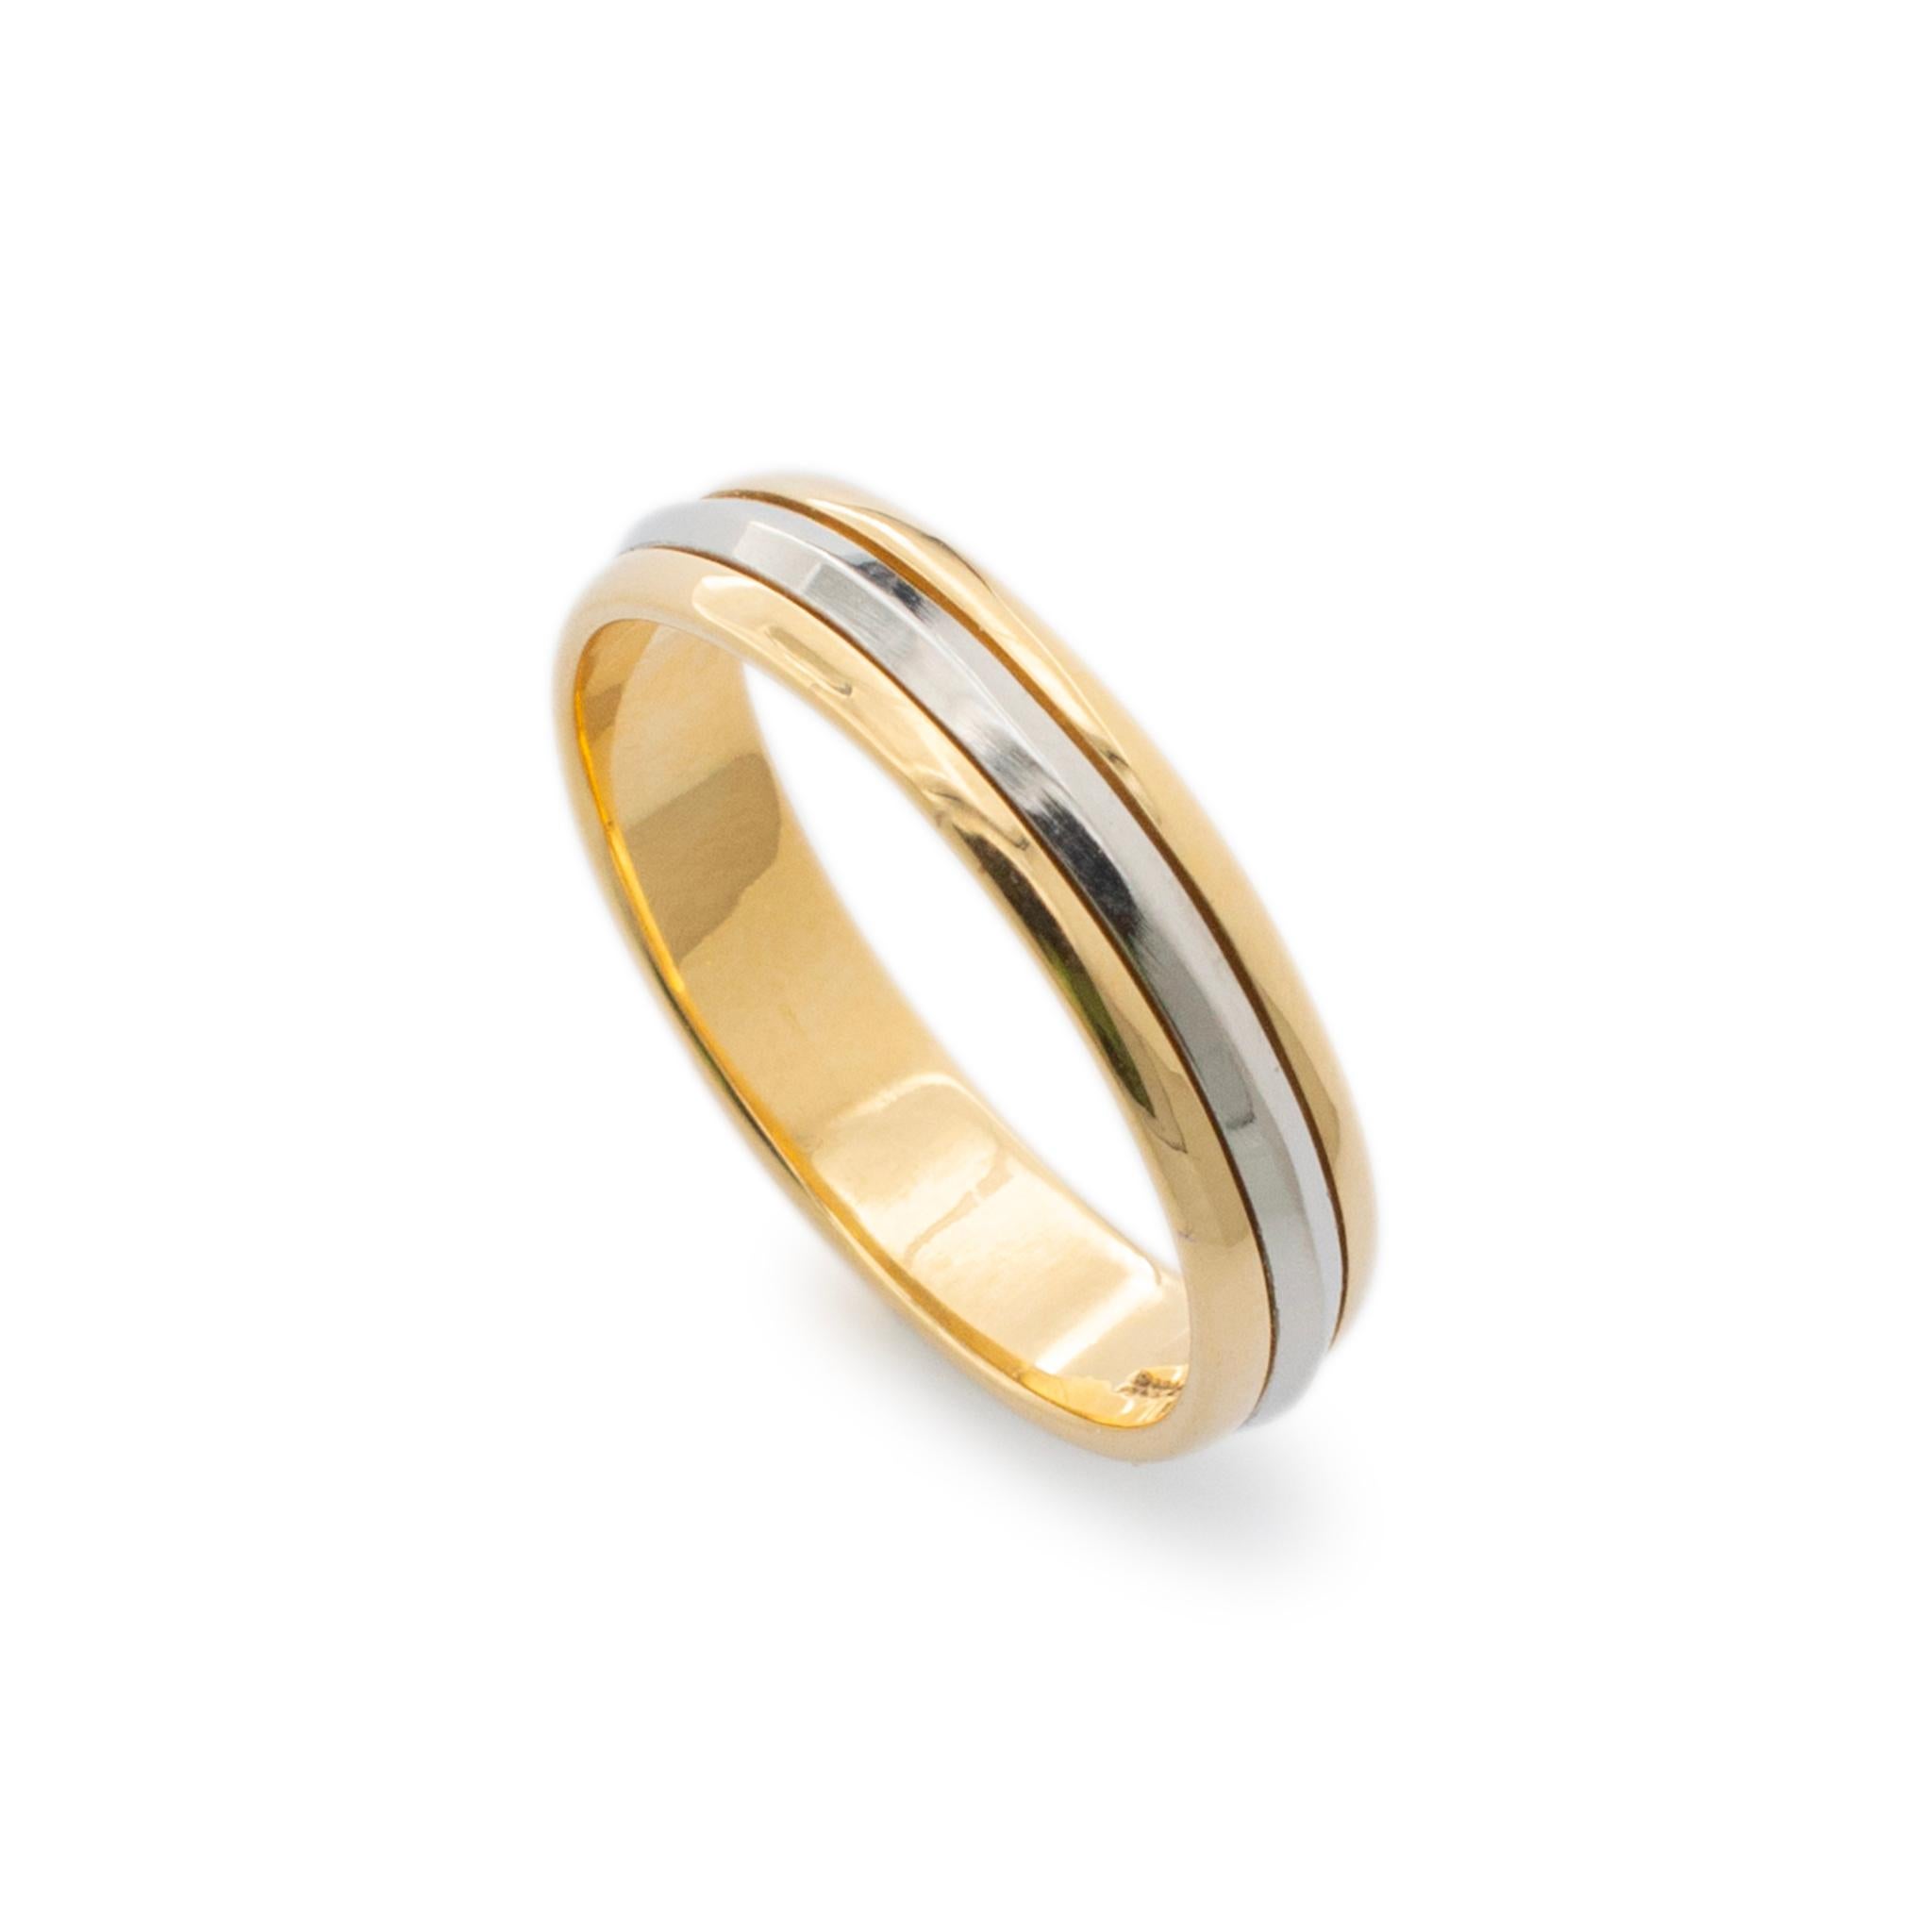 Brand: Artcarved

Gender: Men's

Metal Type: 18K Yellow Gold & Platinum

Size: 11

Shank Maximum Width: 5.00 mm

Weight: 7.20 Grams

Men's platinum and 18K yellow gold three-row wedding band with a half-round shank. The metals were tested and